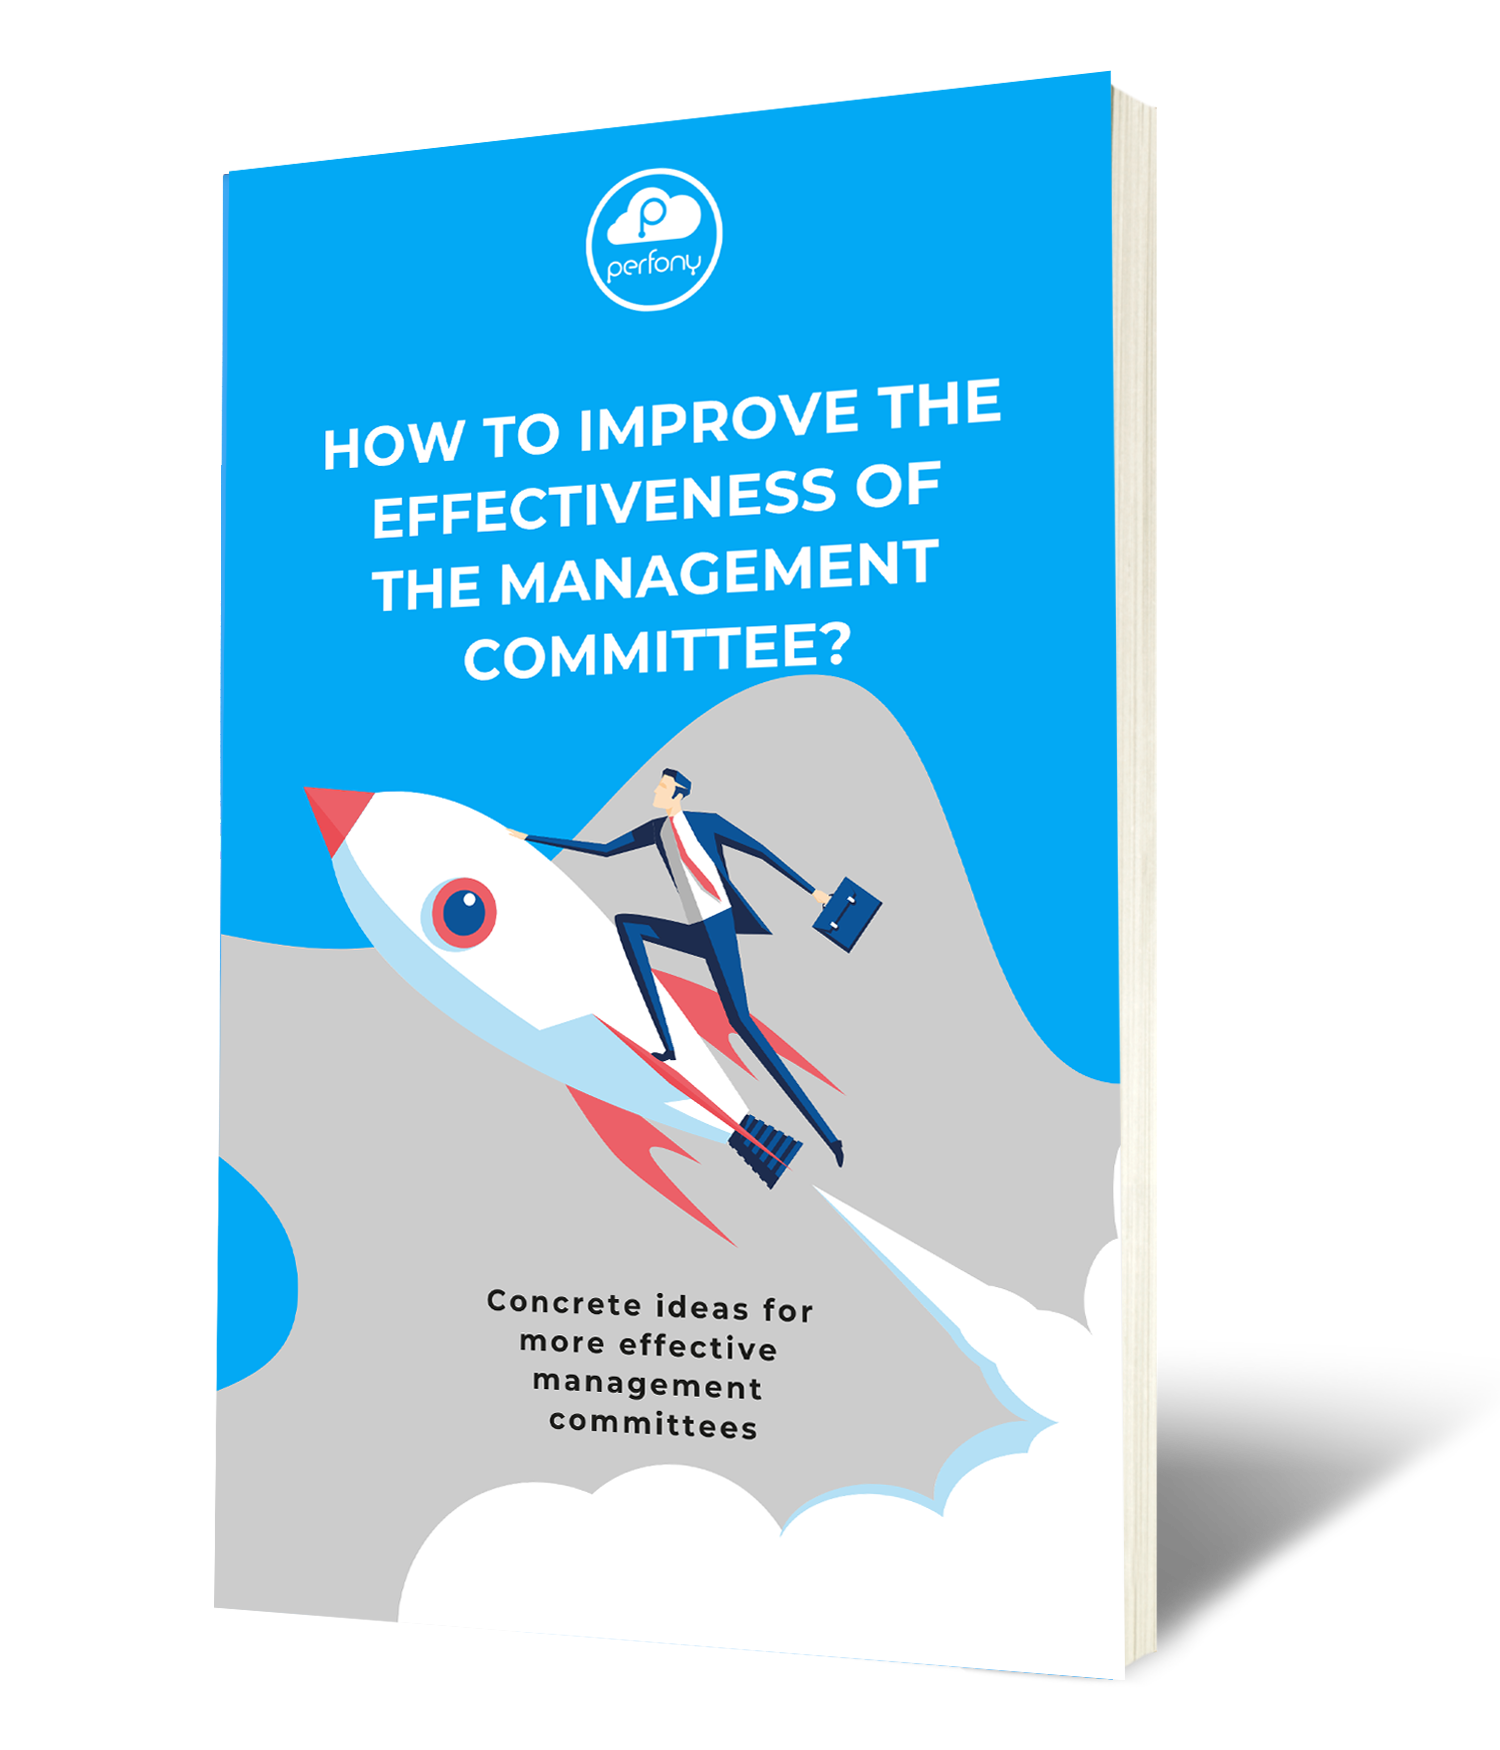 Find out how to improve the efficiency of your Management Committees